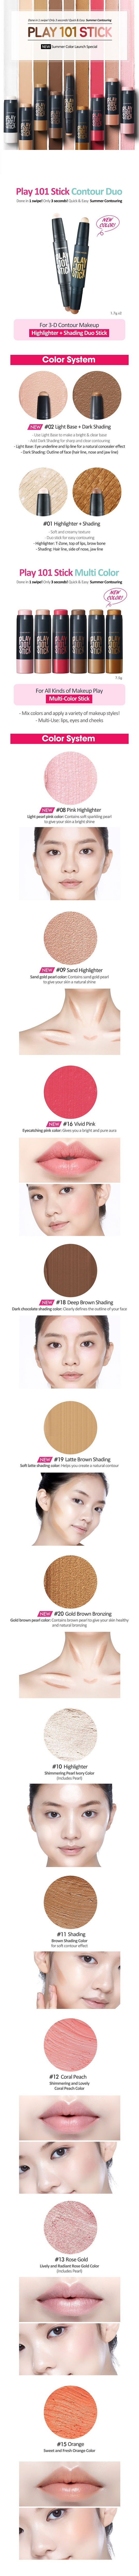 [Etude house] Play 101 Stick Multi Color 7.5g #13 Rose Gold